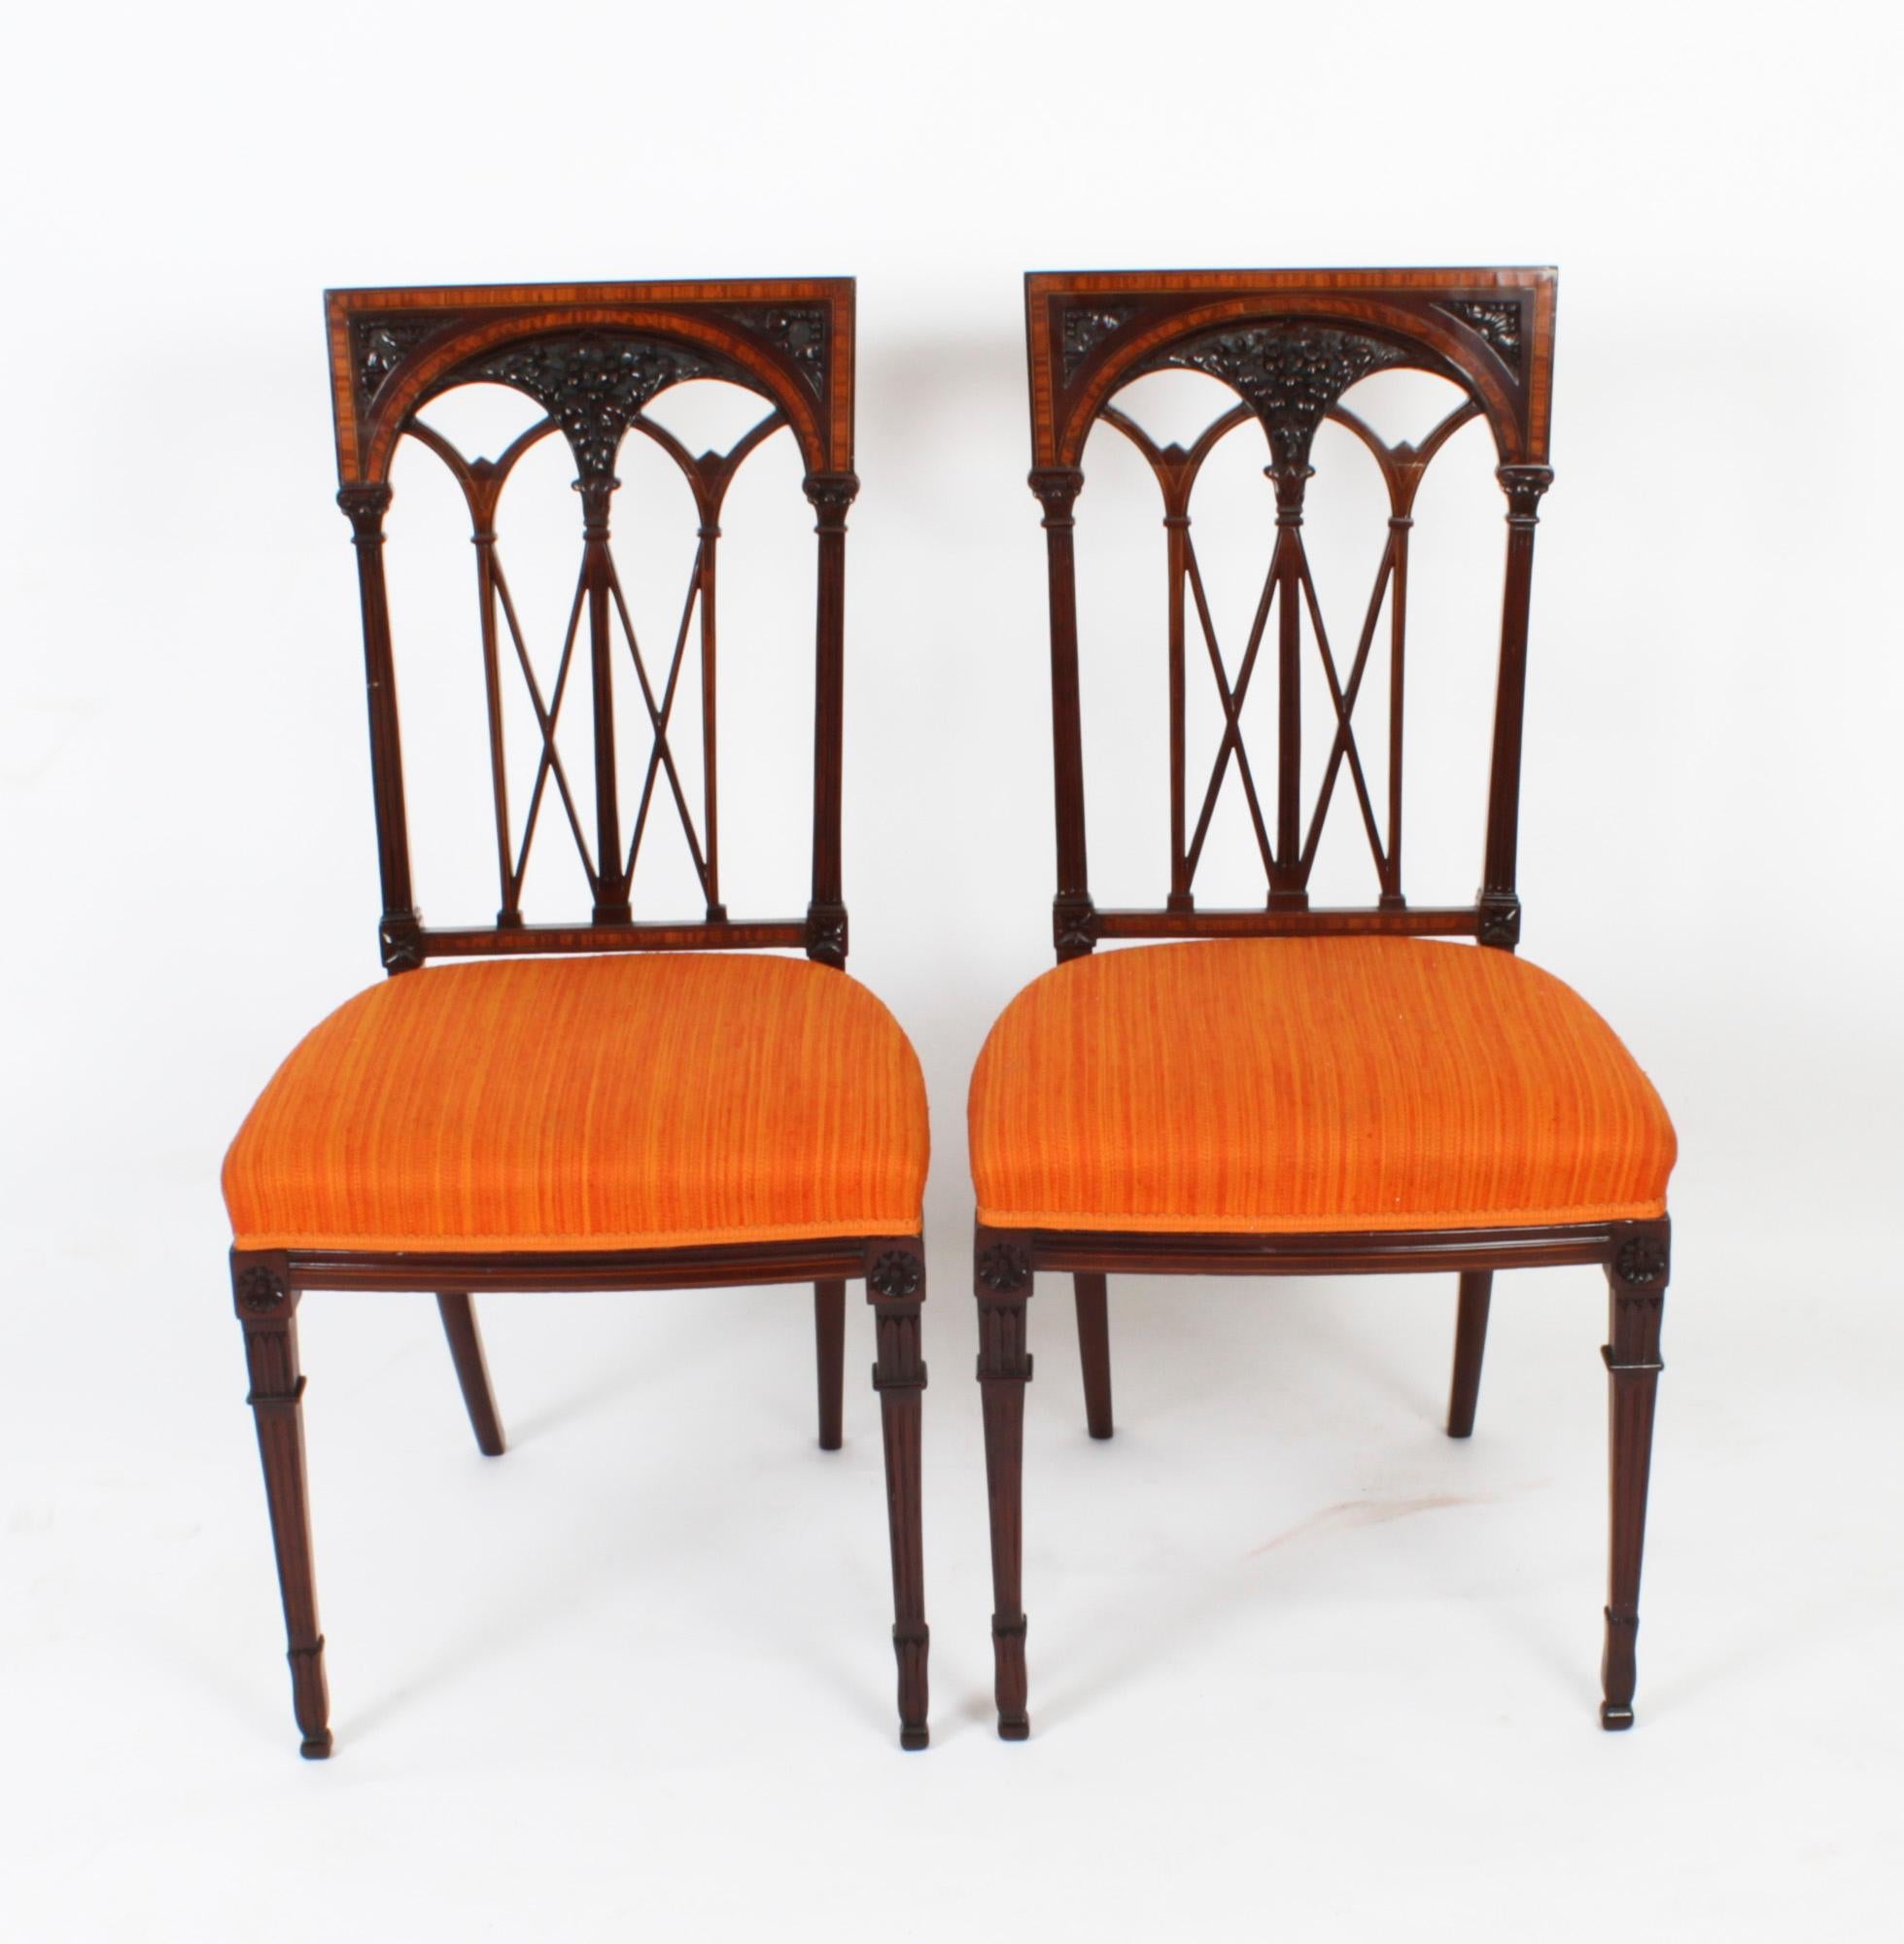 Antique Pair Sheraton Revival Side Chairs Early 20th Century For Sale 14